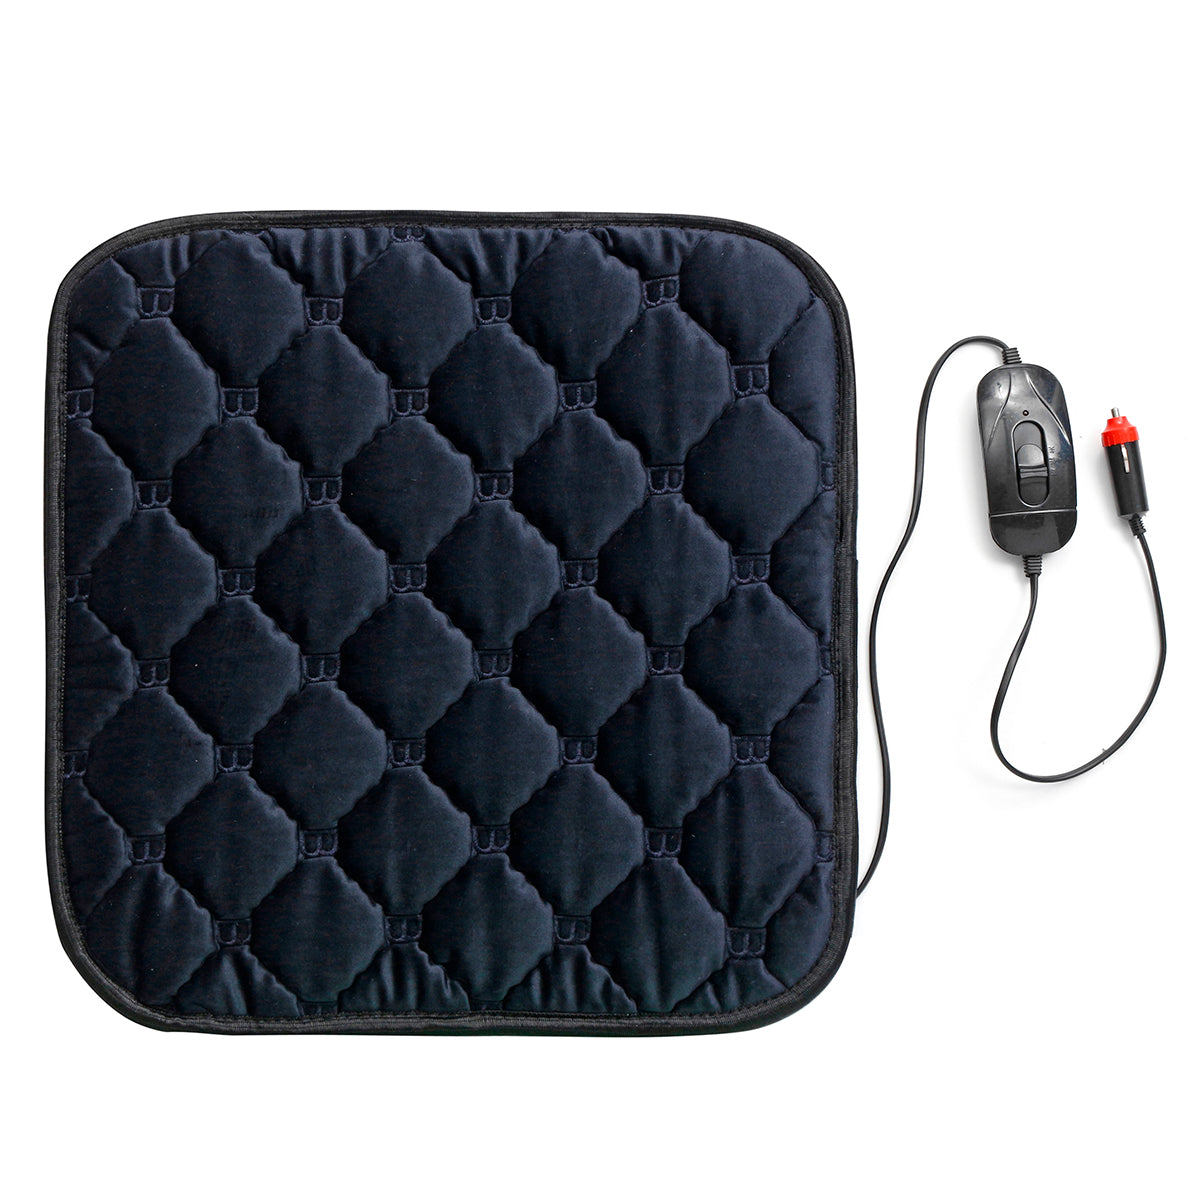 Electric Car Seat Heated Cushion Heater Pad Cover Down Feature Cotton with Switch 12V 24W - Auto GoShop